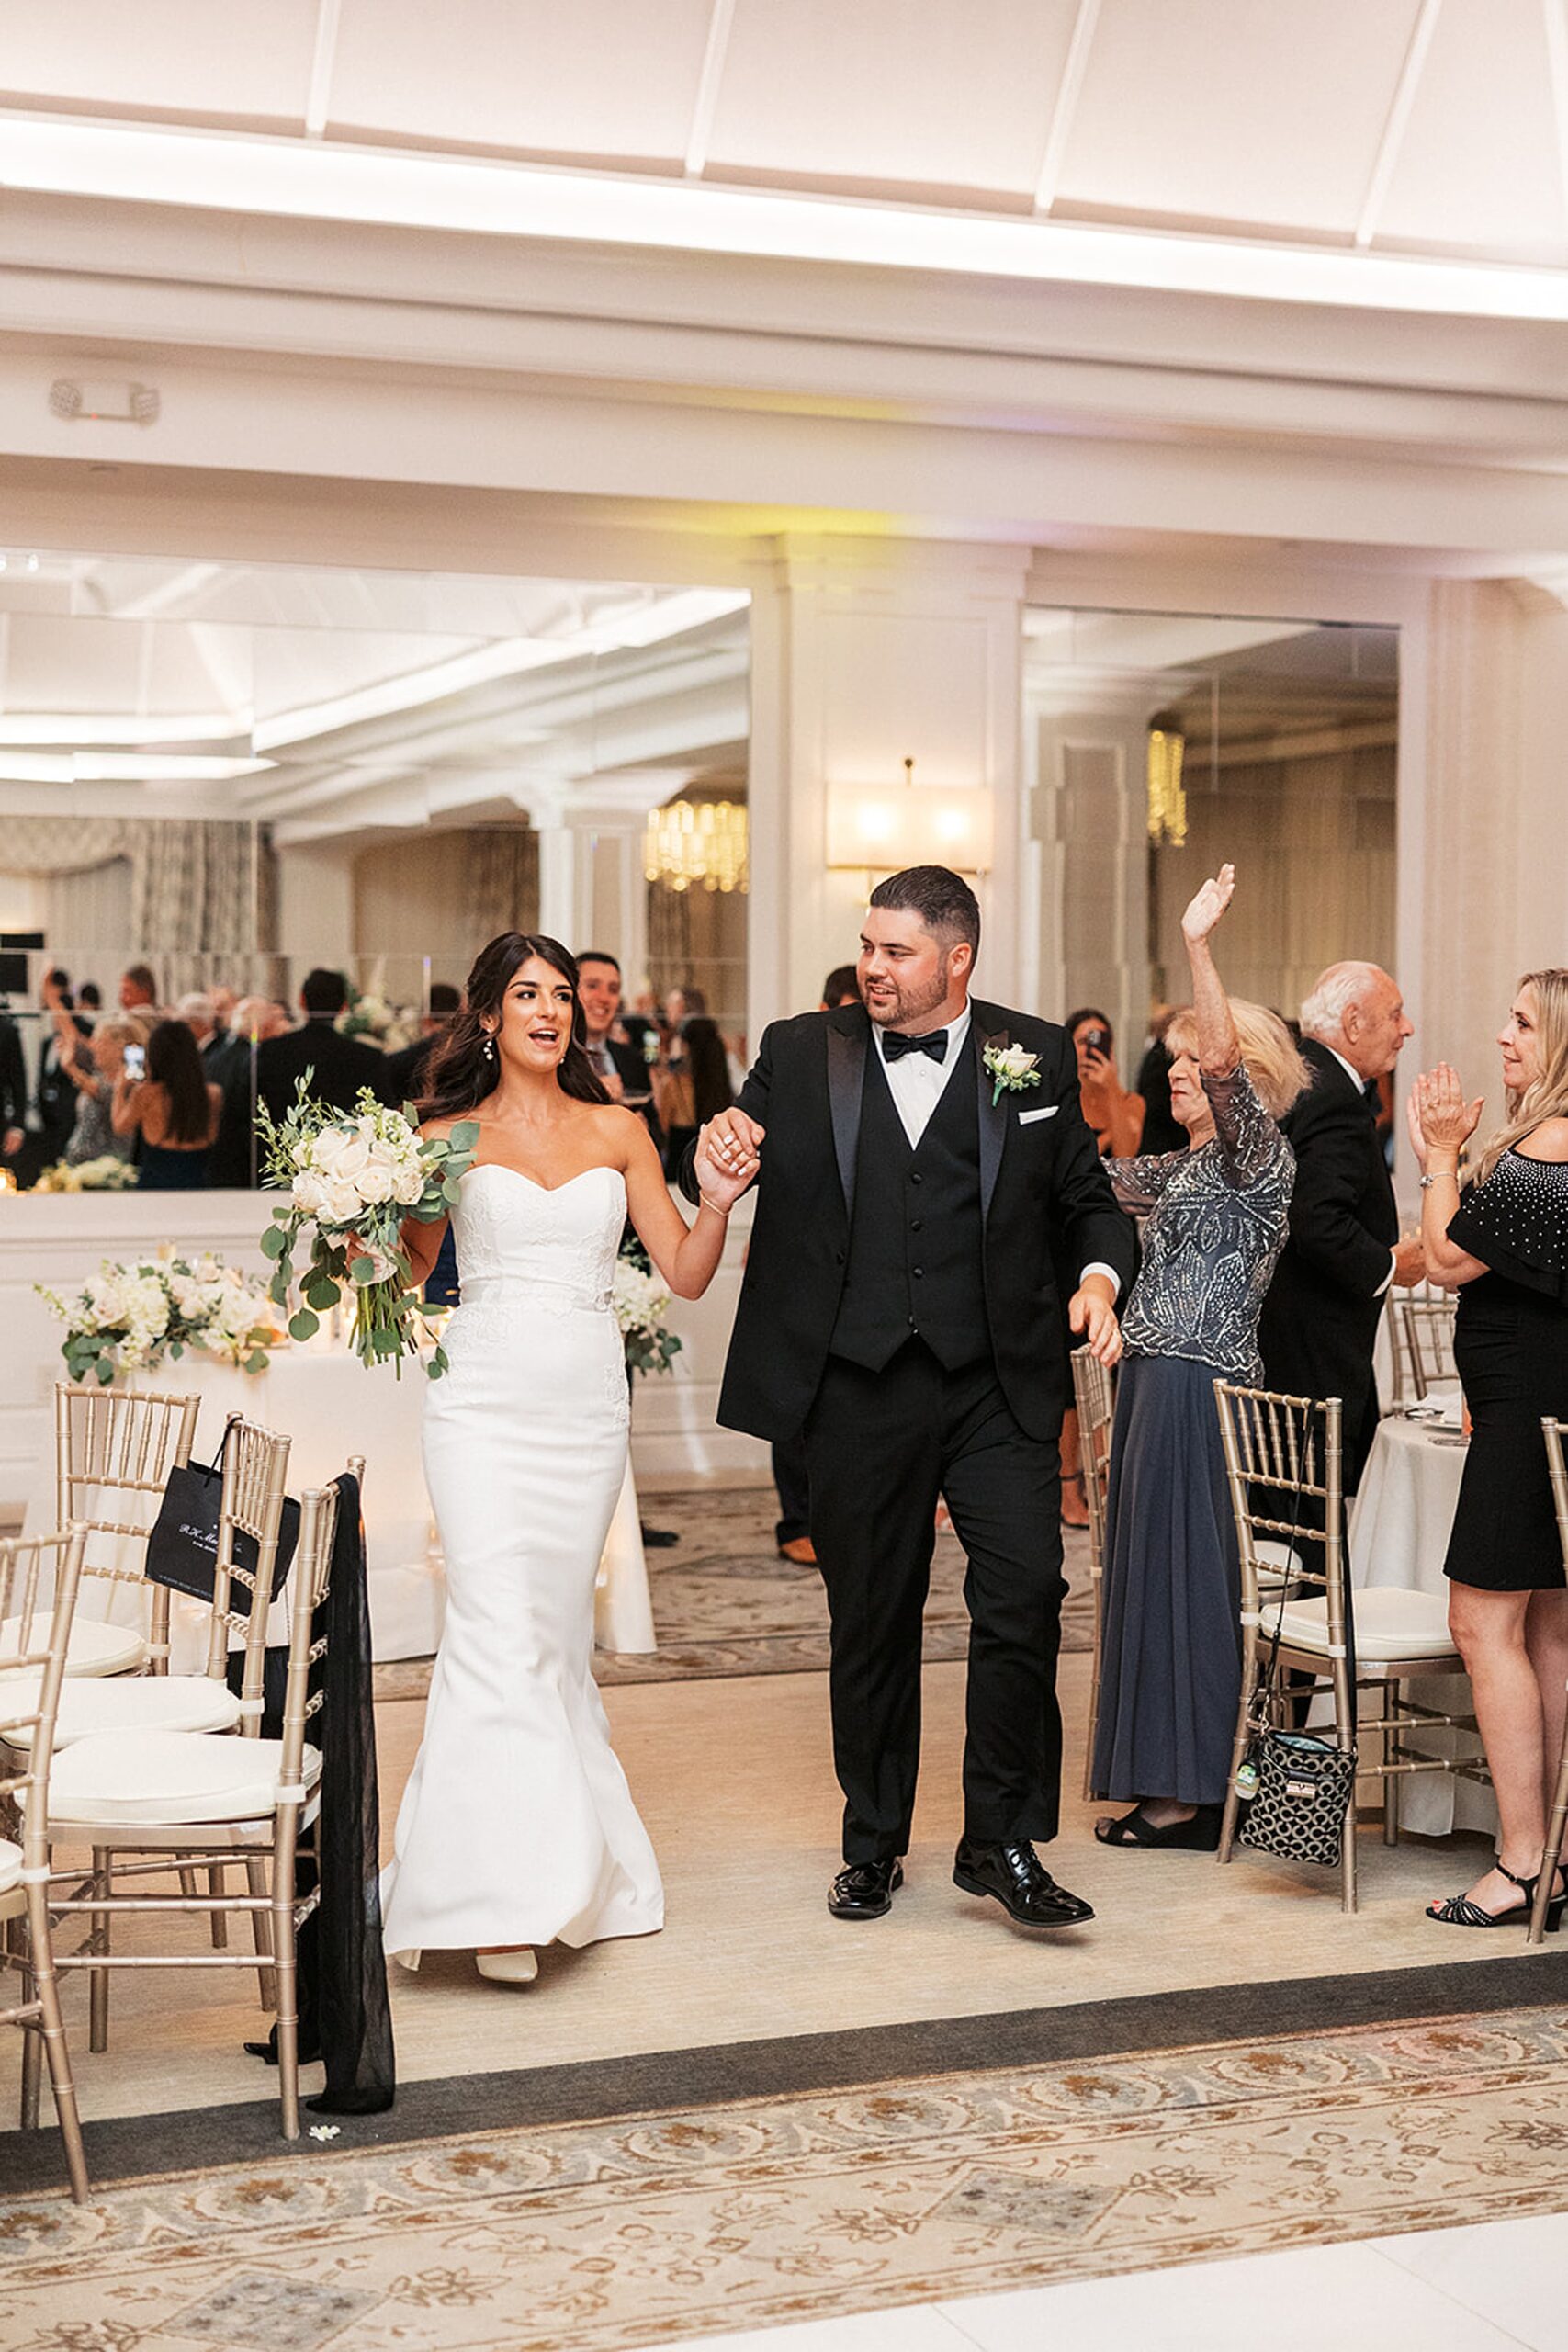 Newlyweds celebrate with their guests as they enter their reception